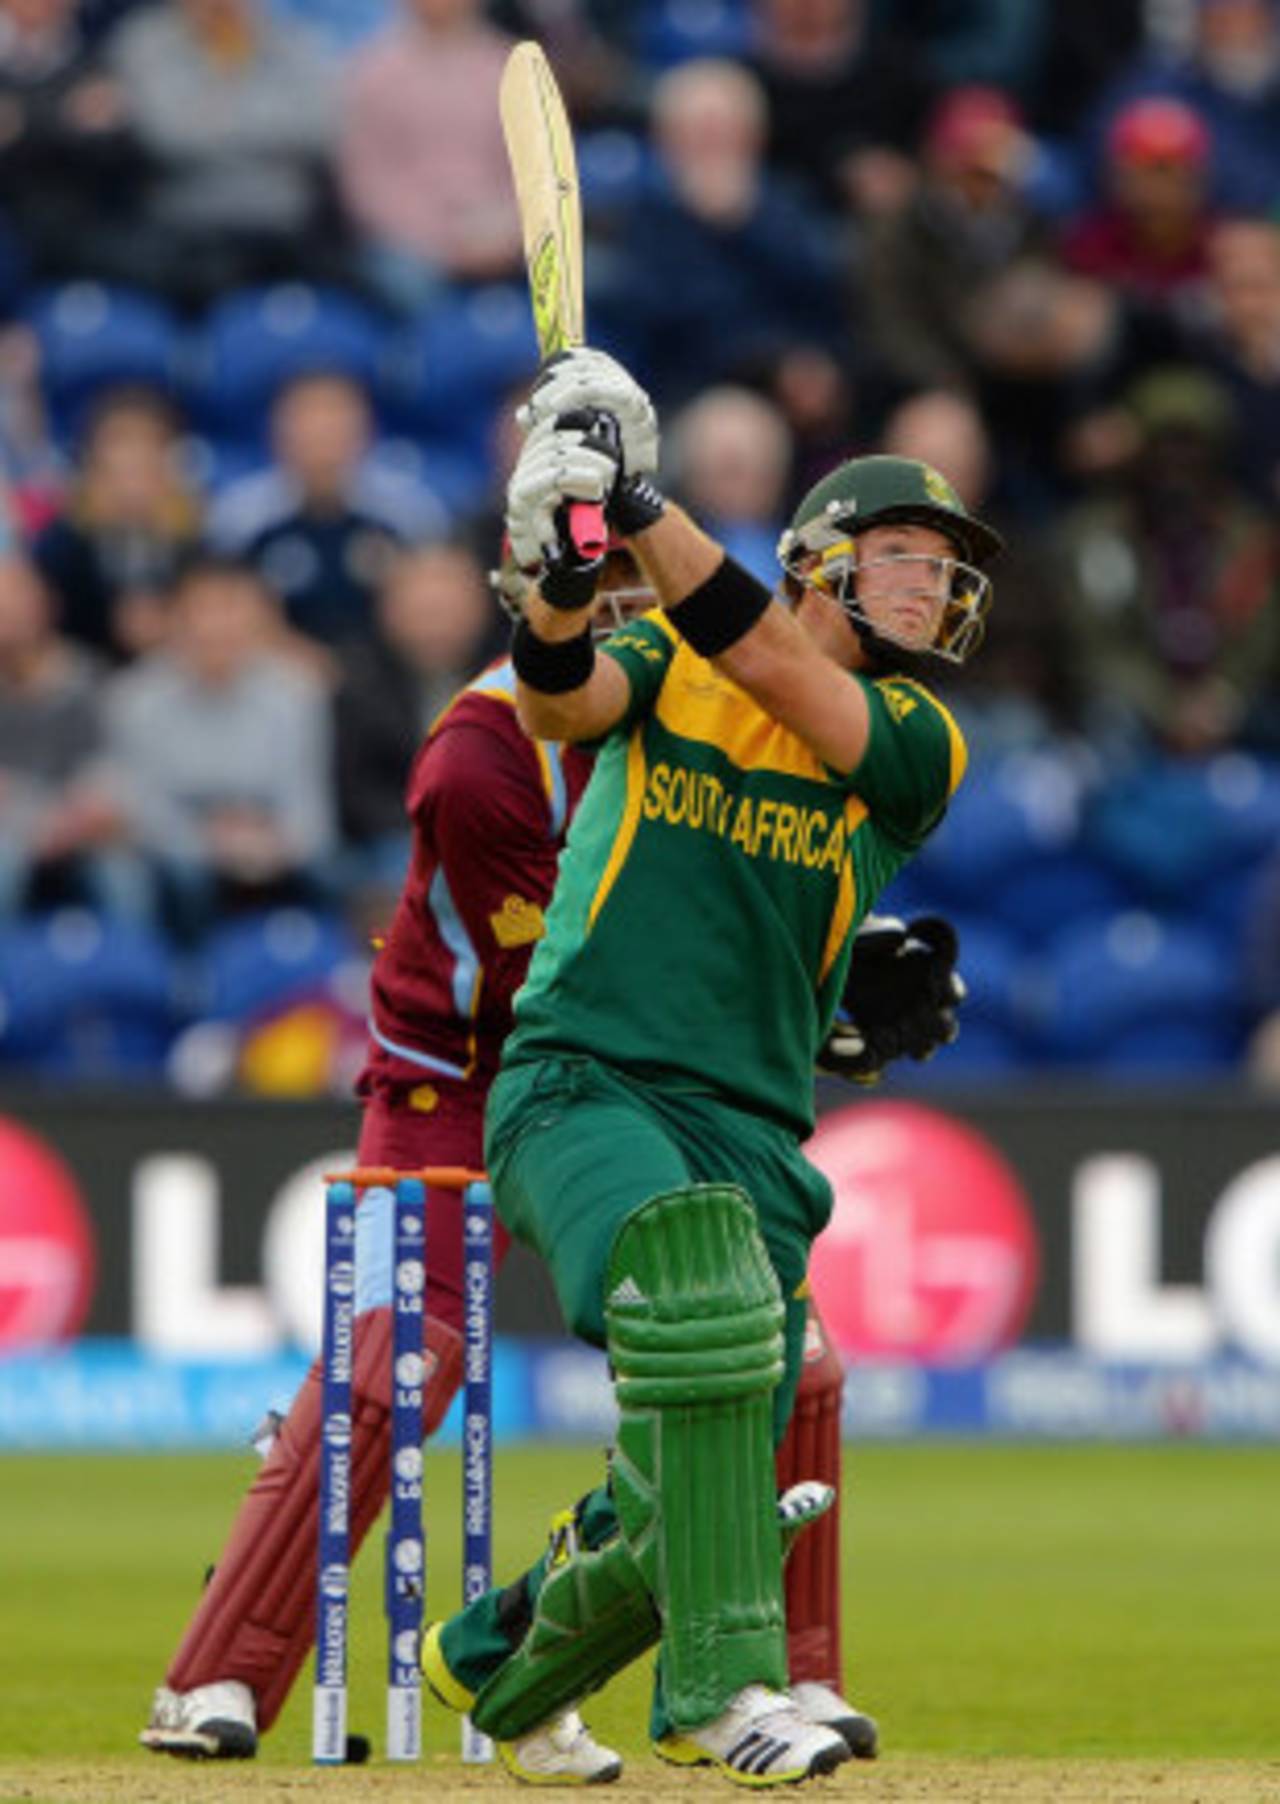 Colin Ingram hits a six over long-off, South Africa v West Indies, Champions Trophy, Group B, Cardiff, June 14, 2013